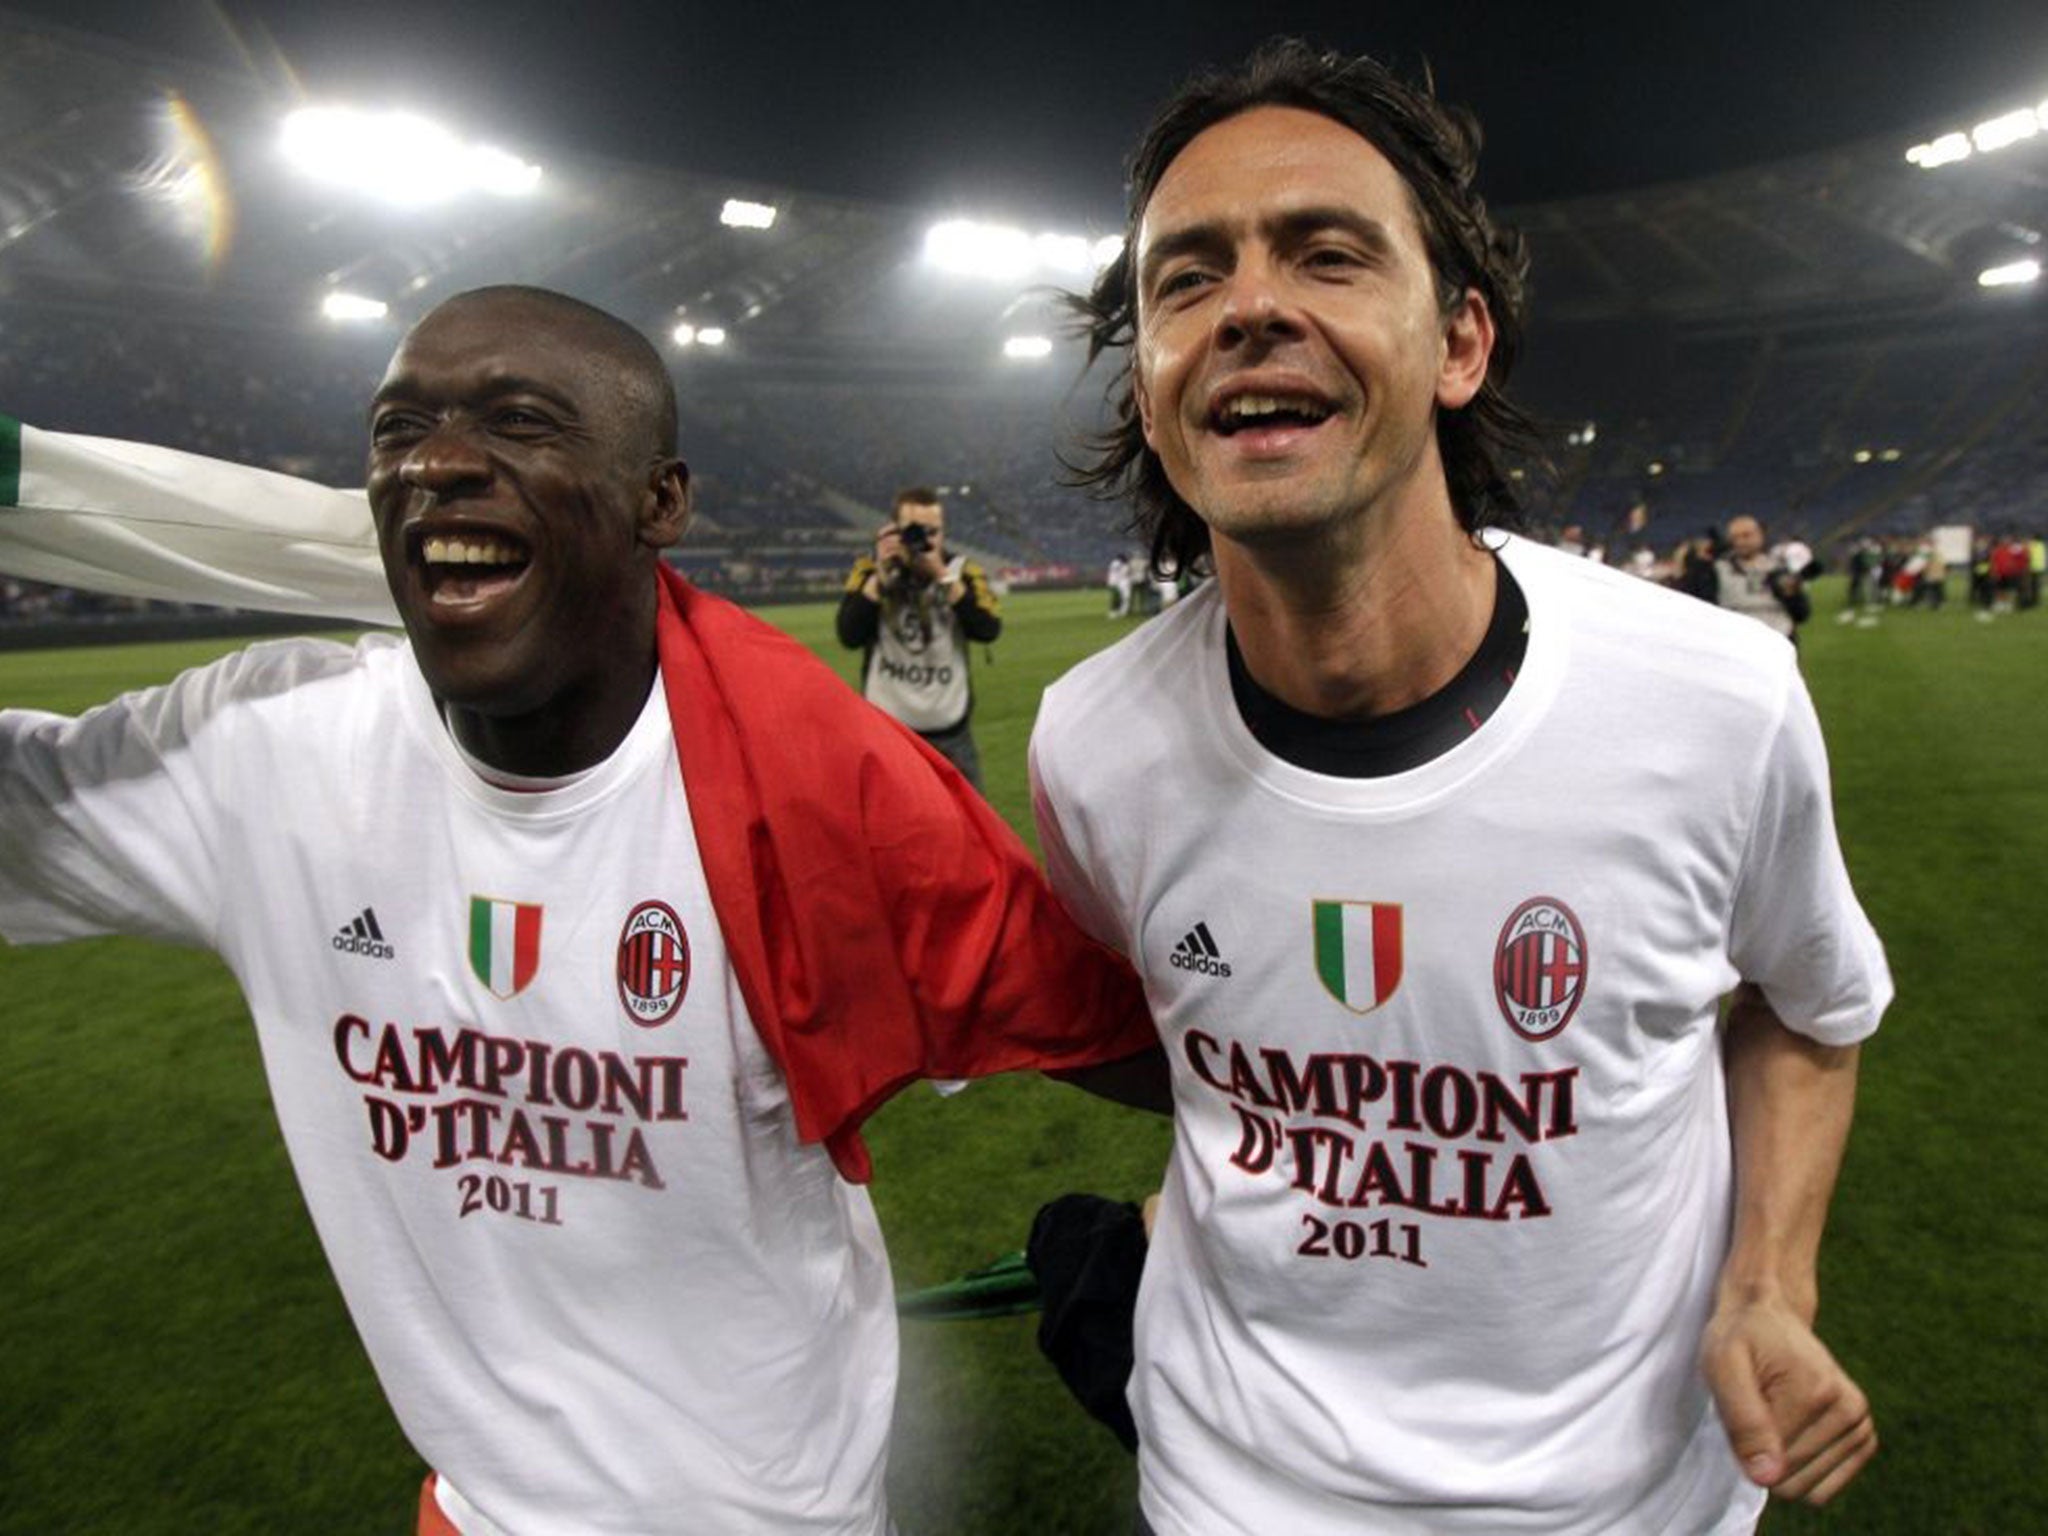 Clarence Seedorf (L) has been sacked by AC Milan, with Filipo Inzaghi (R) appointed as his replacement